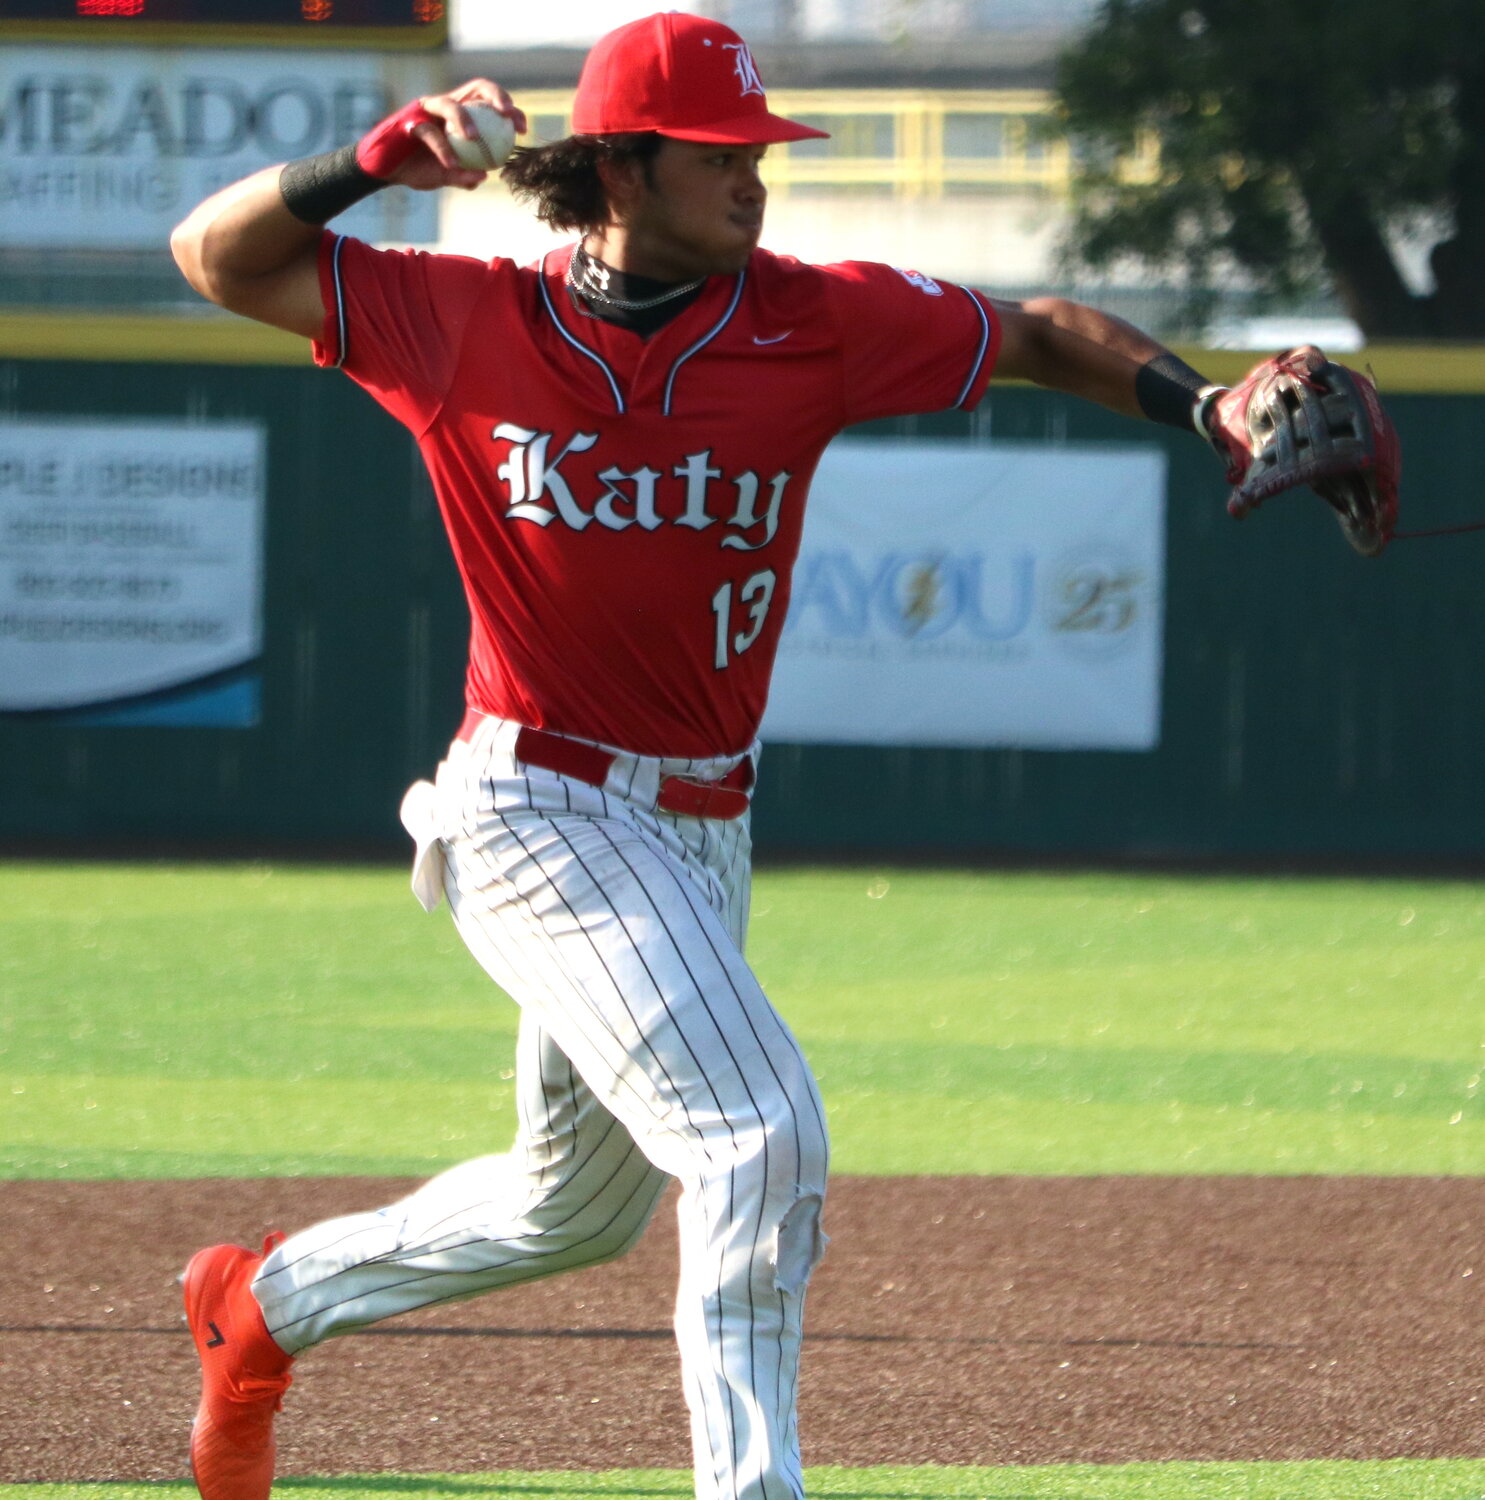 Nayden Ramirez throws to first during Wednesday's Regional Semifinal between Katy and Clear Springs at Deer Park.